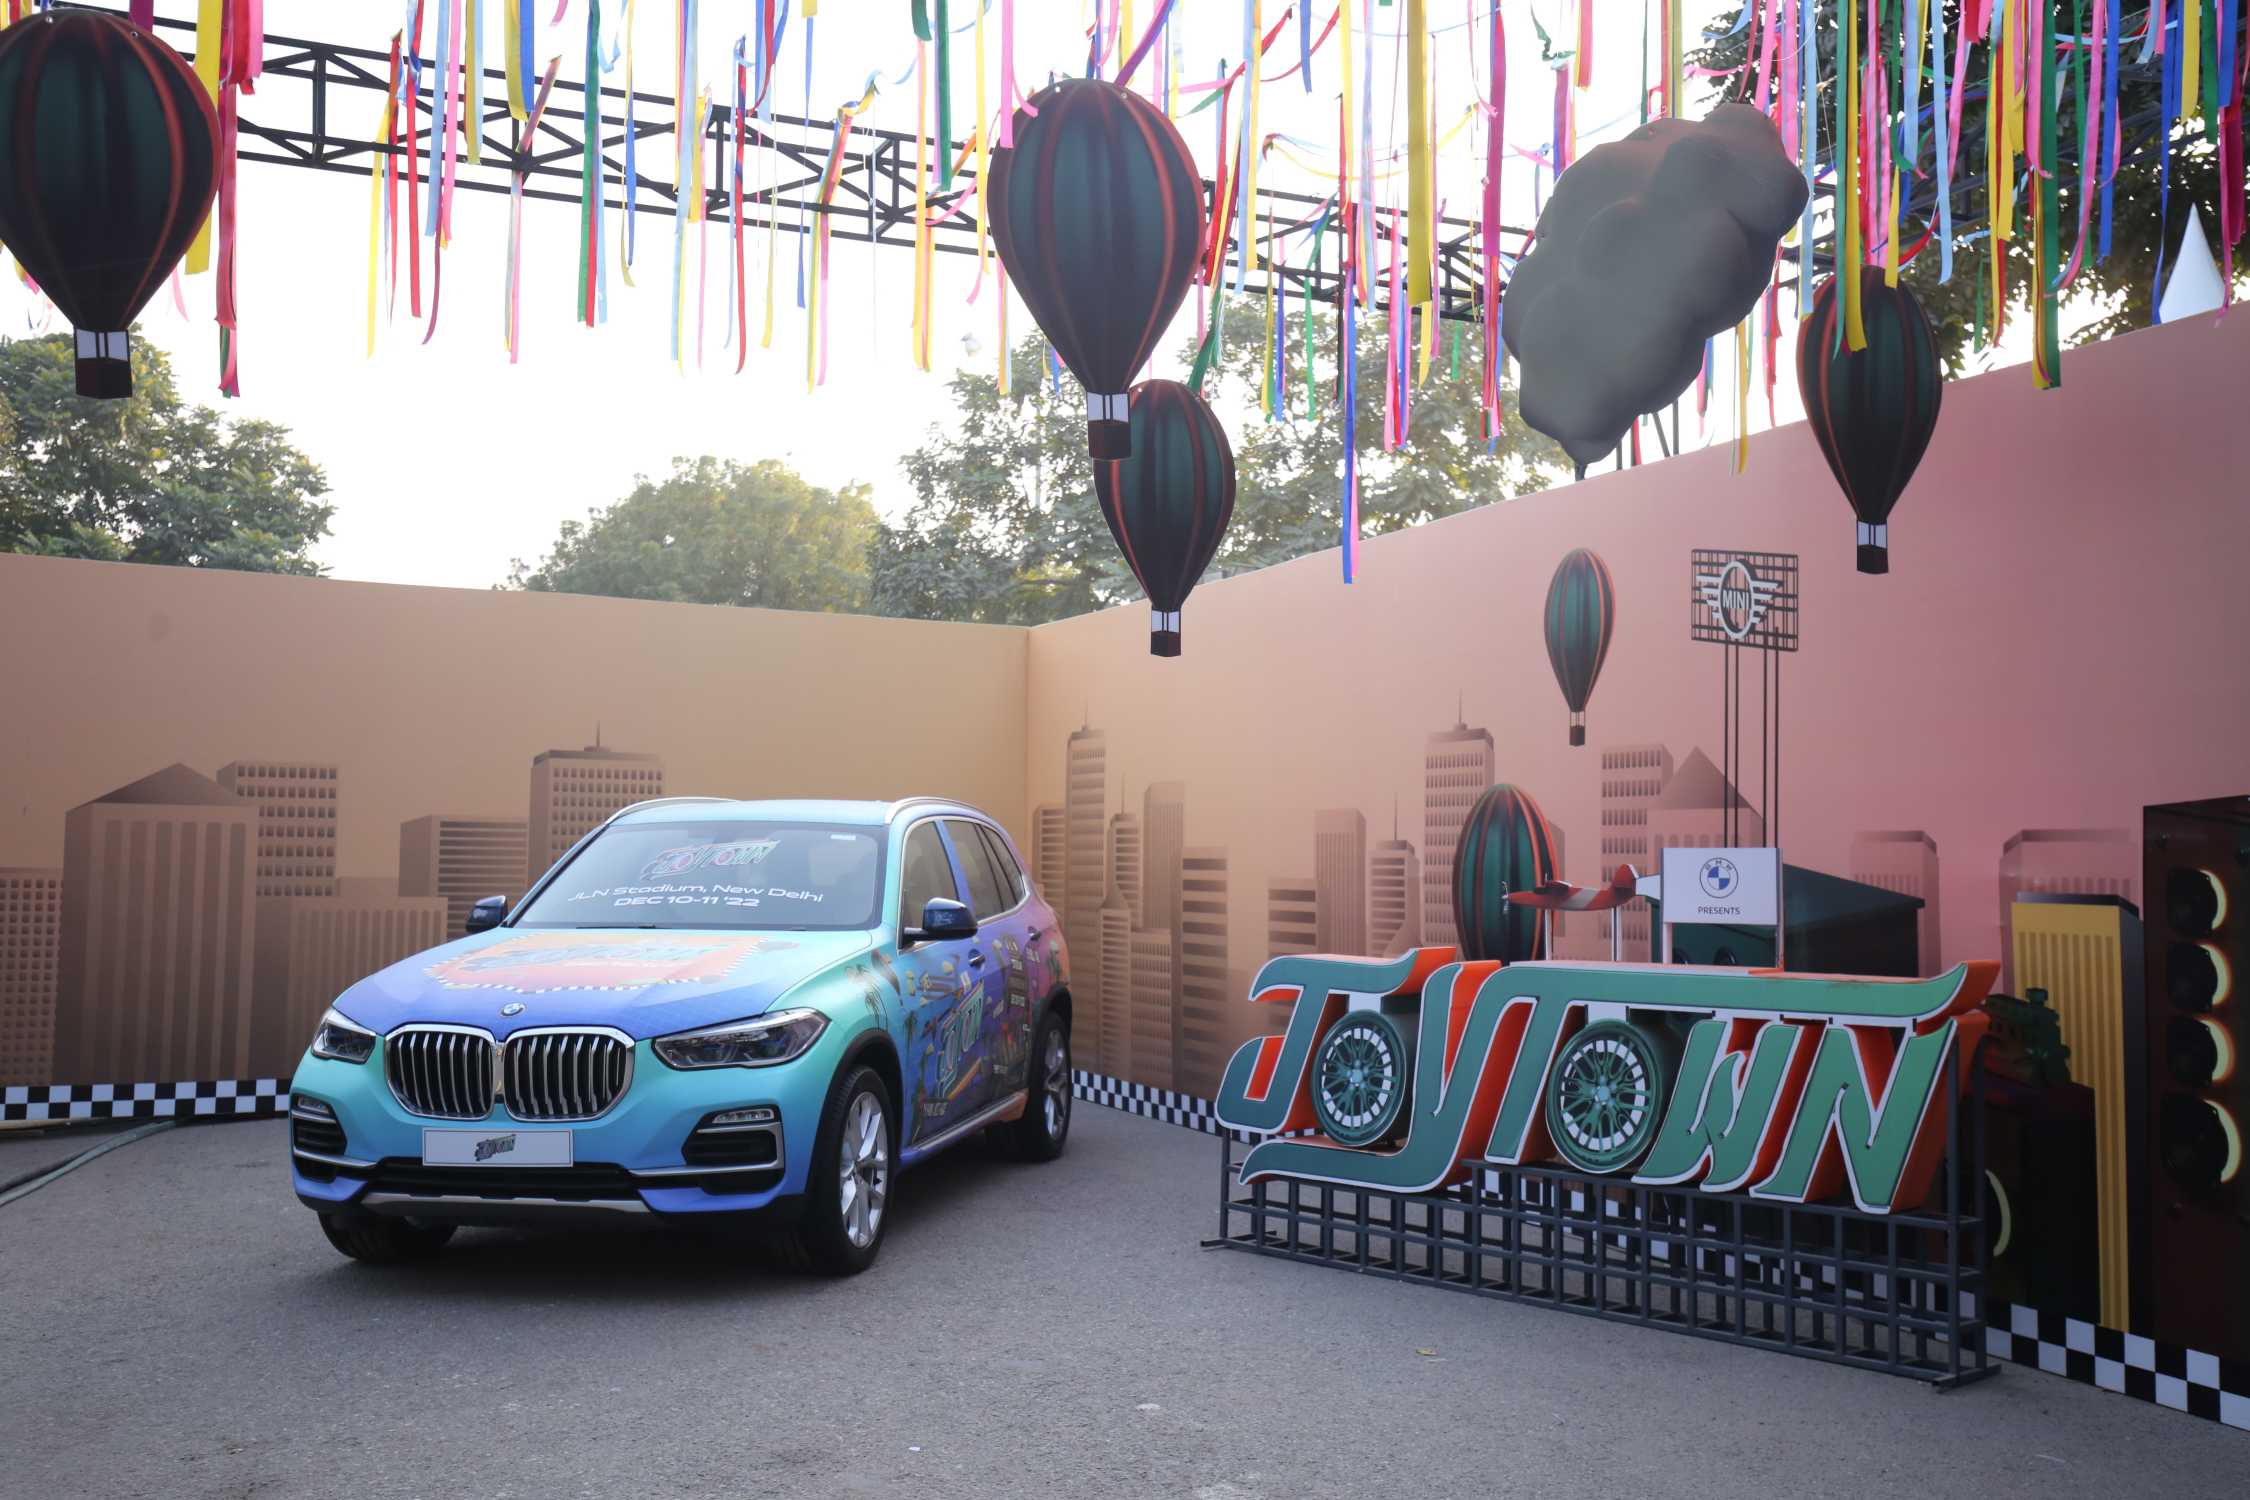 BMW Joytown wraps up on a high note with unforgettable moments and music.